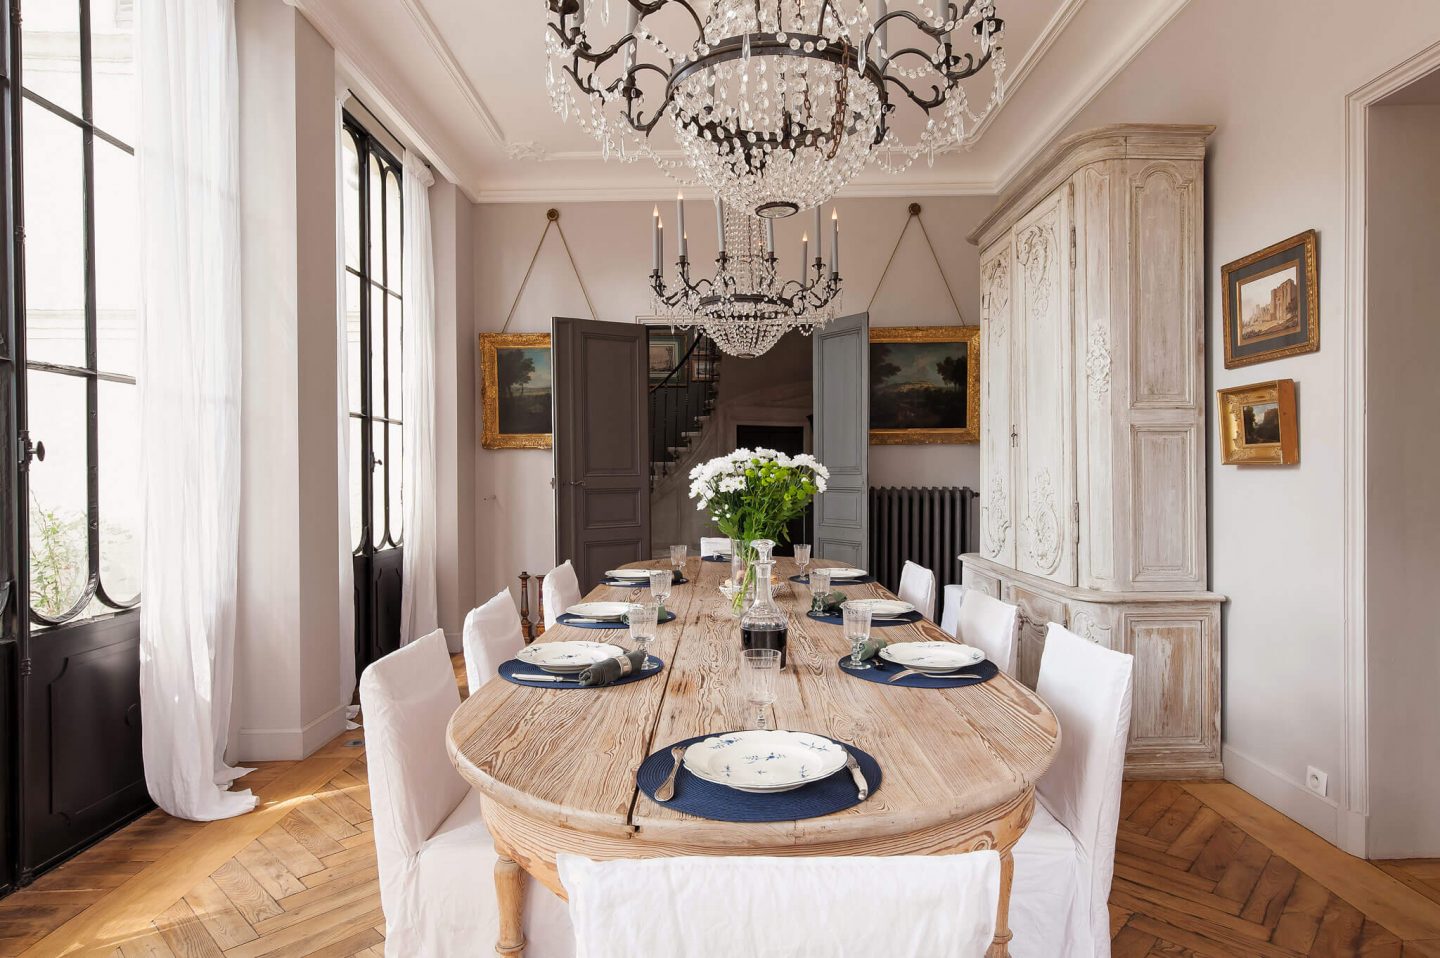 White and serene French dining room with rustic oak farm table. Come see a Breathtaking French Château Tour in Provence With Photo Gallery of Historical Architecture, Dramatic Eclectic Interiors & Oddities!